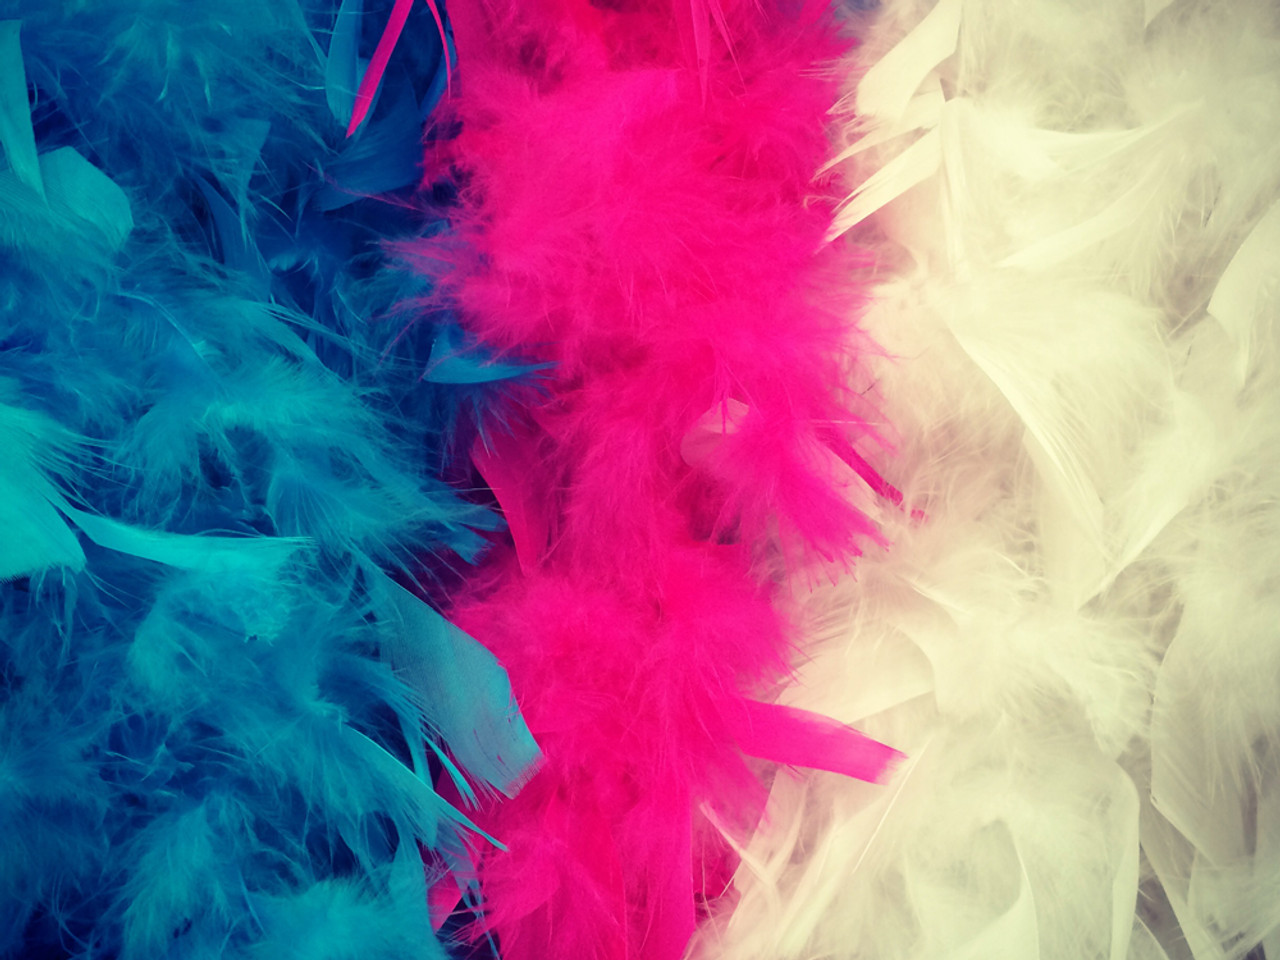 2 Yards - Hot Pink Heavy Weight Chandelle Feather Boa | 80 Gram